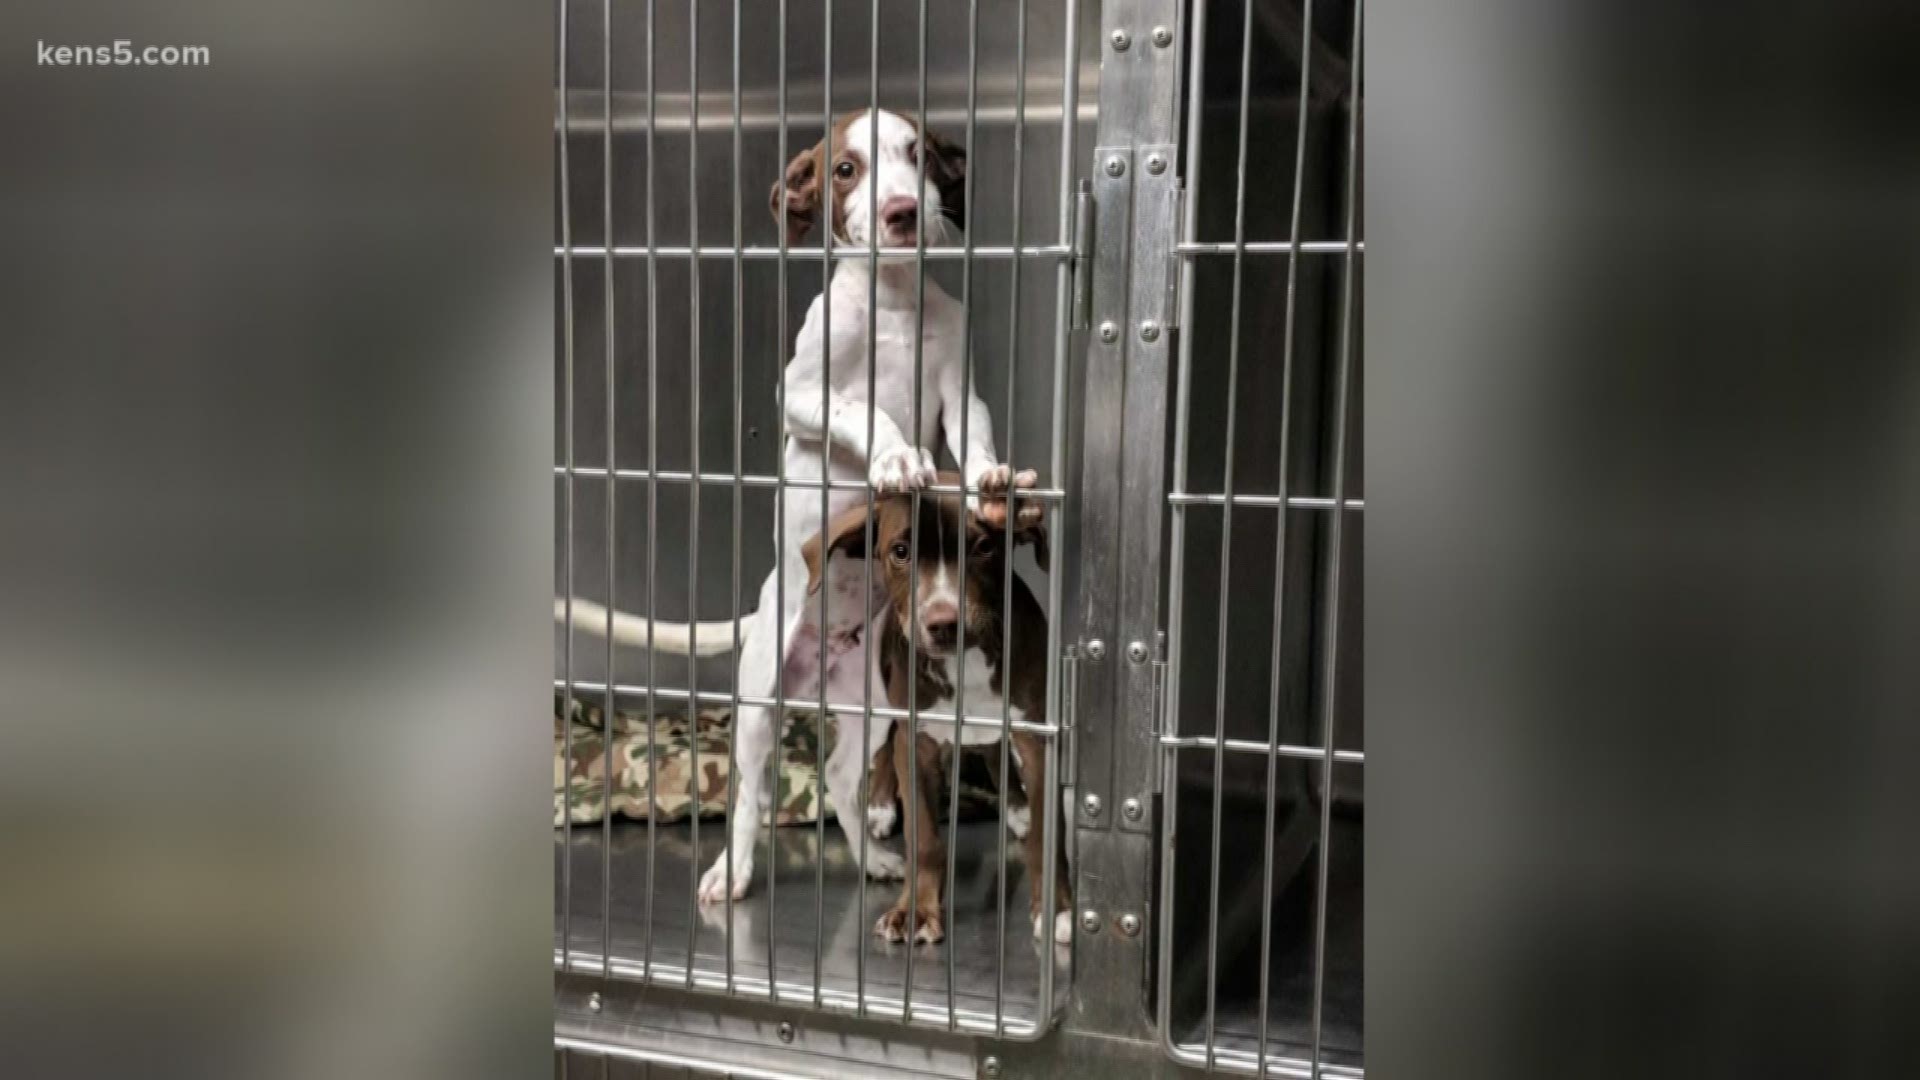 Two puppies found illegally discarded in a west side San Antonio dumpster are now available for adoption after shelter staff nursed them back to health.